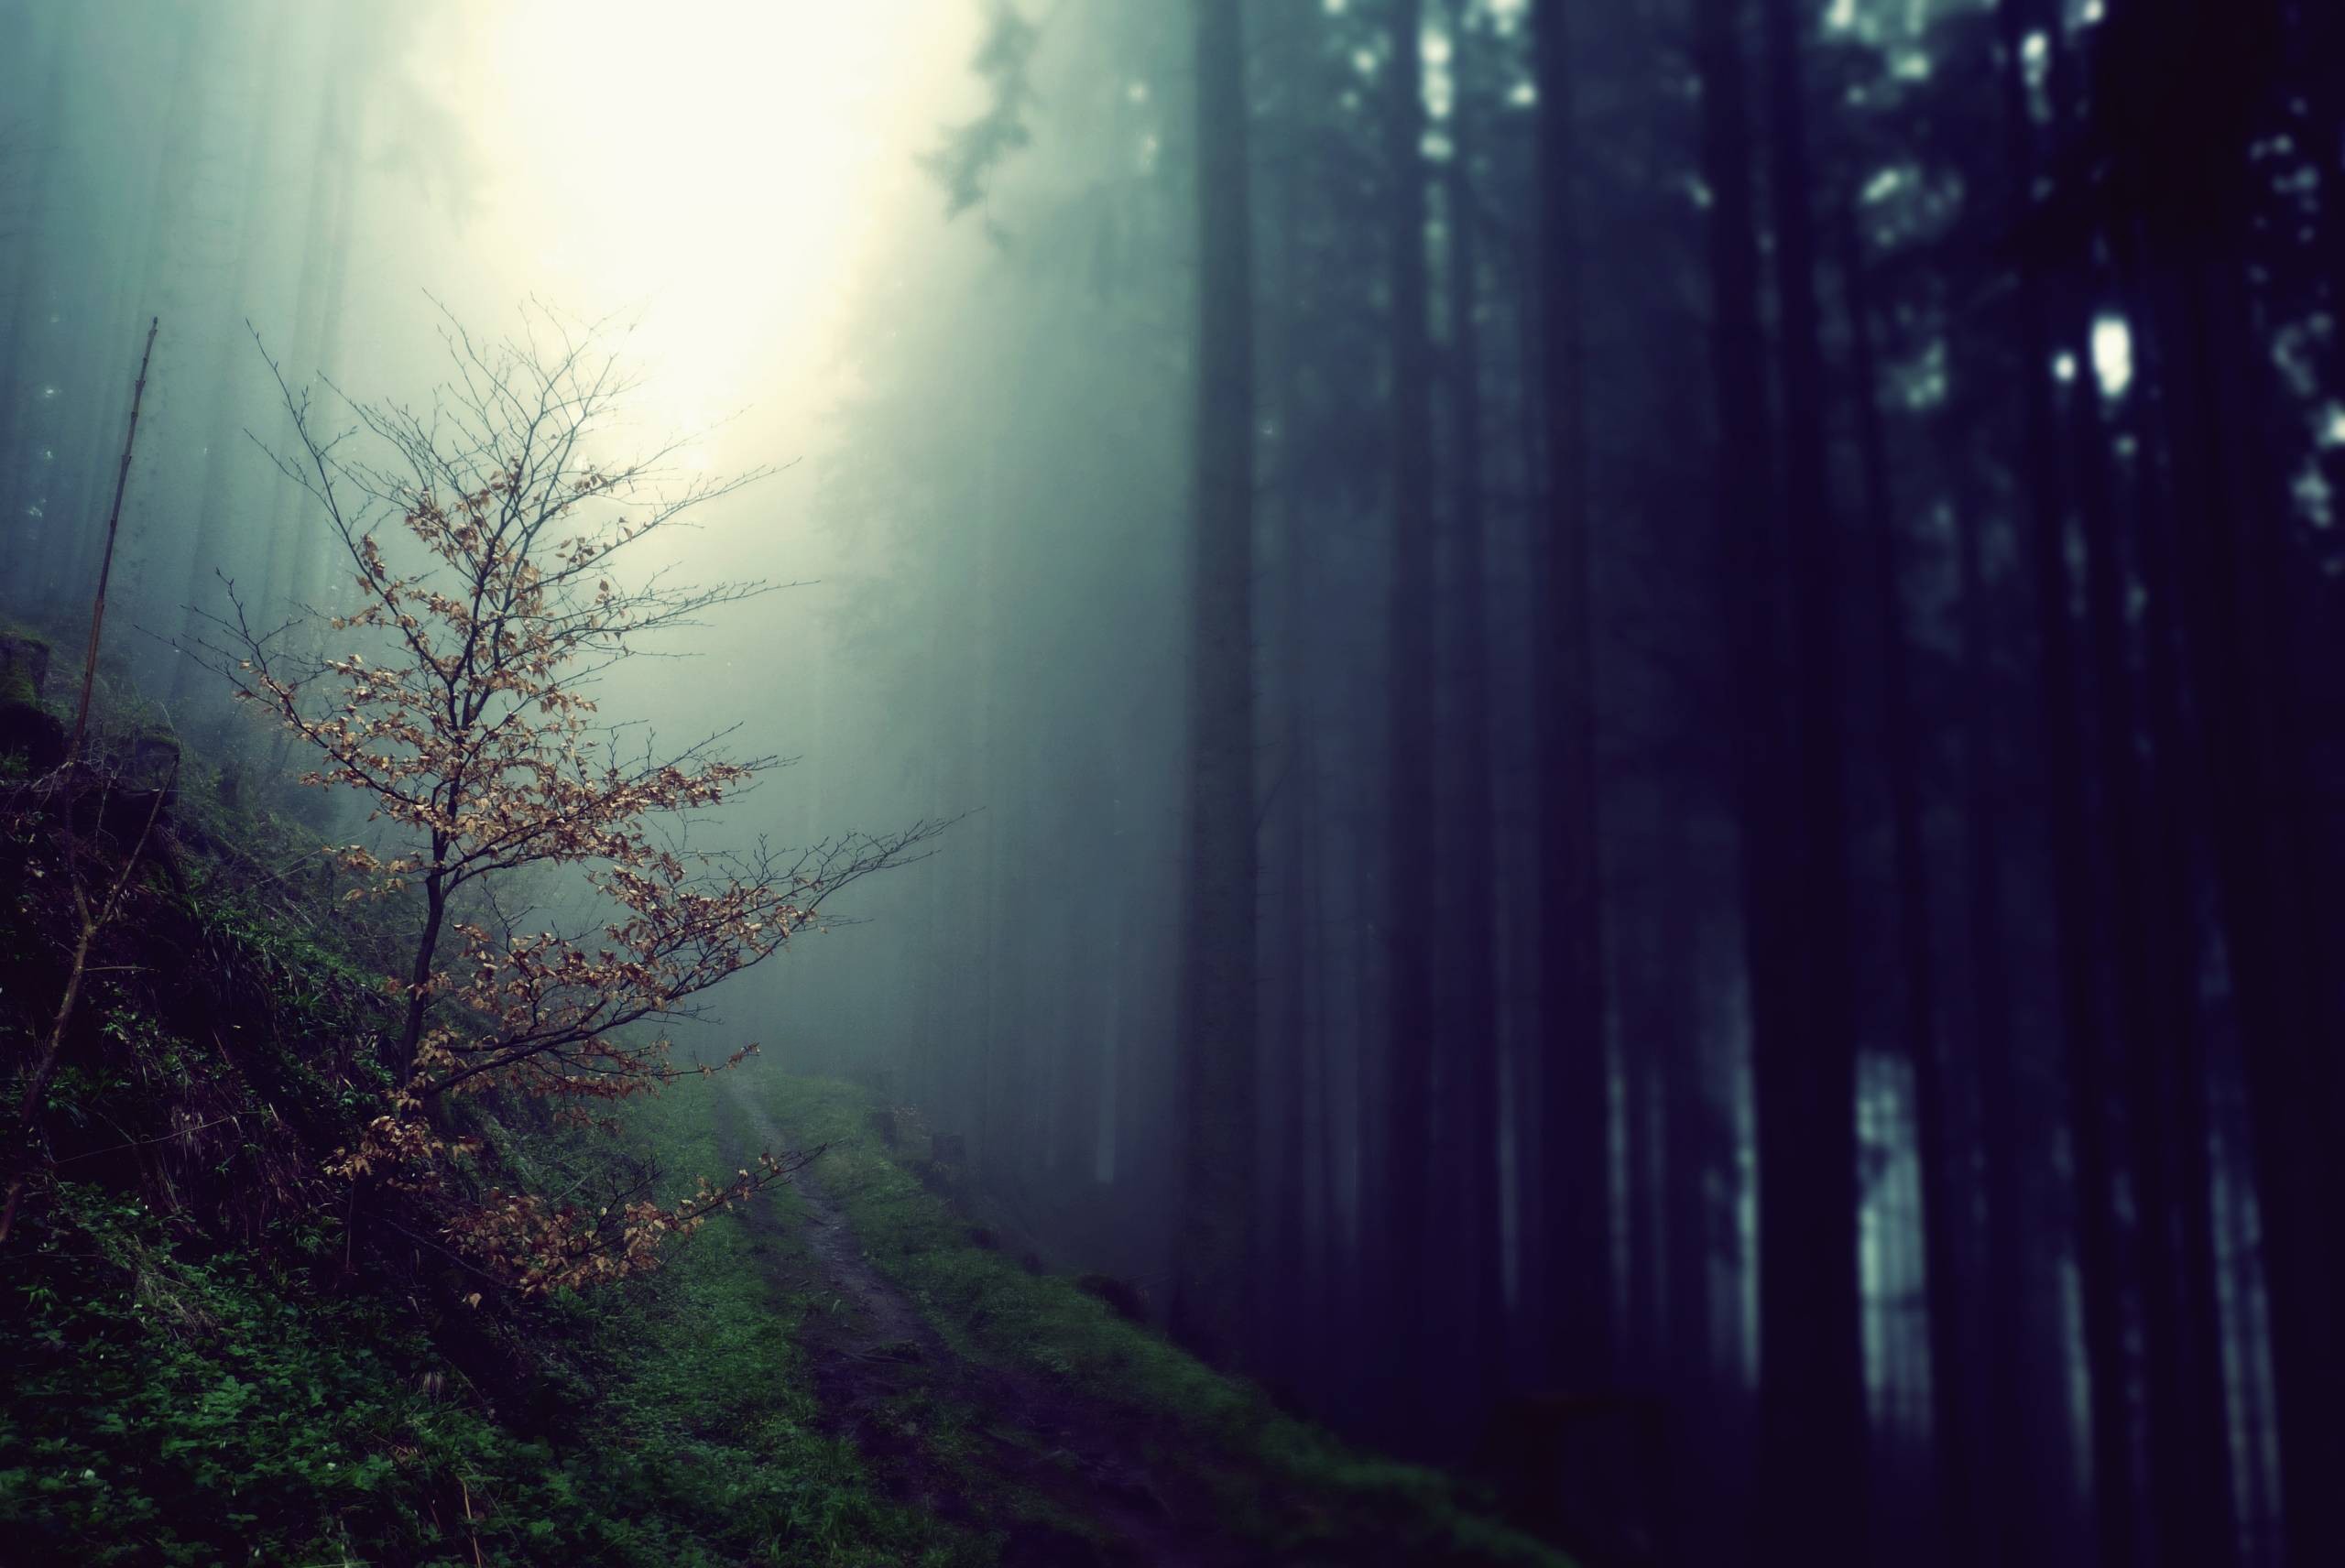 General 2560x1712 trees forest nature mist outdoors plants